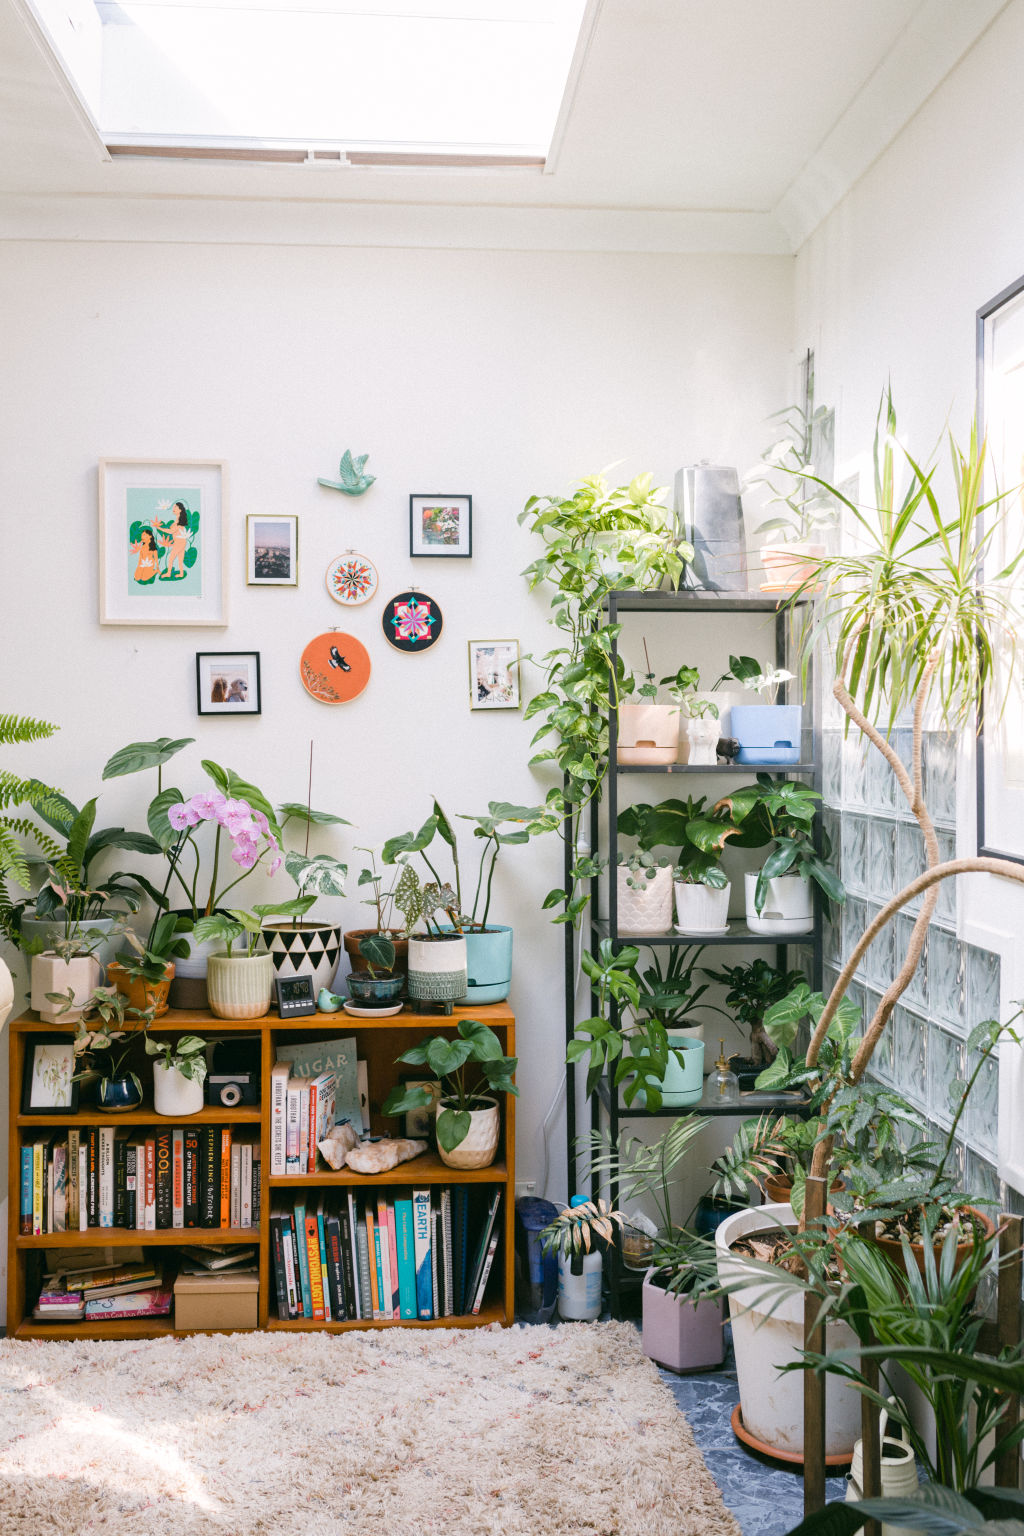 High house prices have left renters with no option than to create indoor gardens instead. Photo: Vaida Savickaite